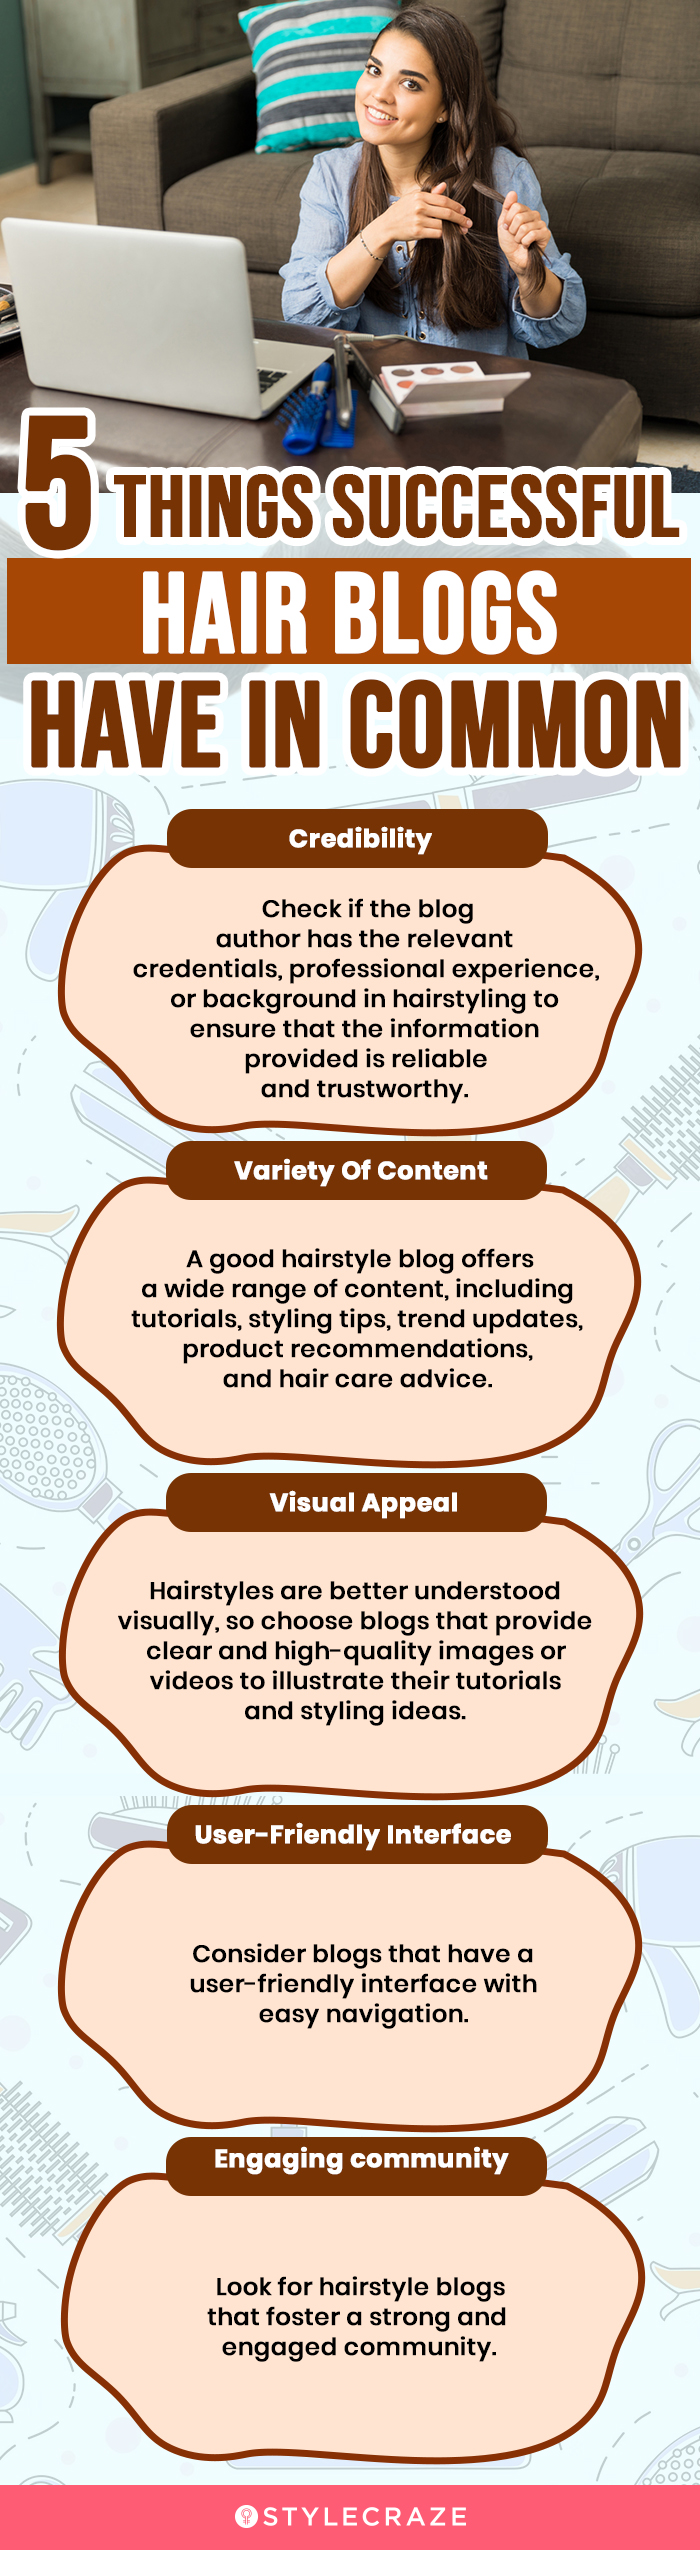 5 things successful hair blogs have in common (infographic)